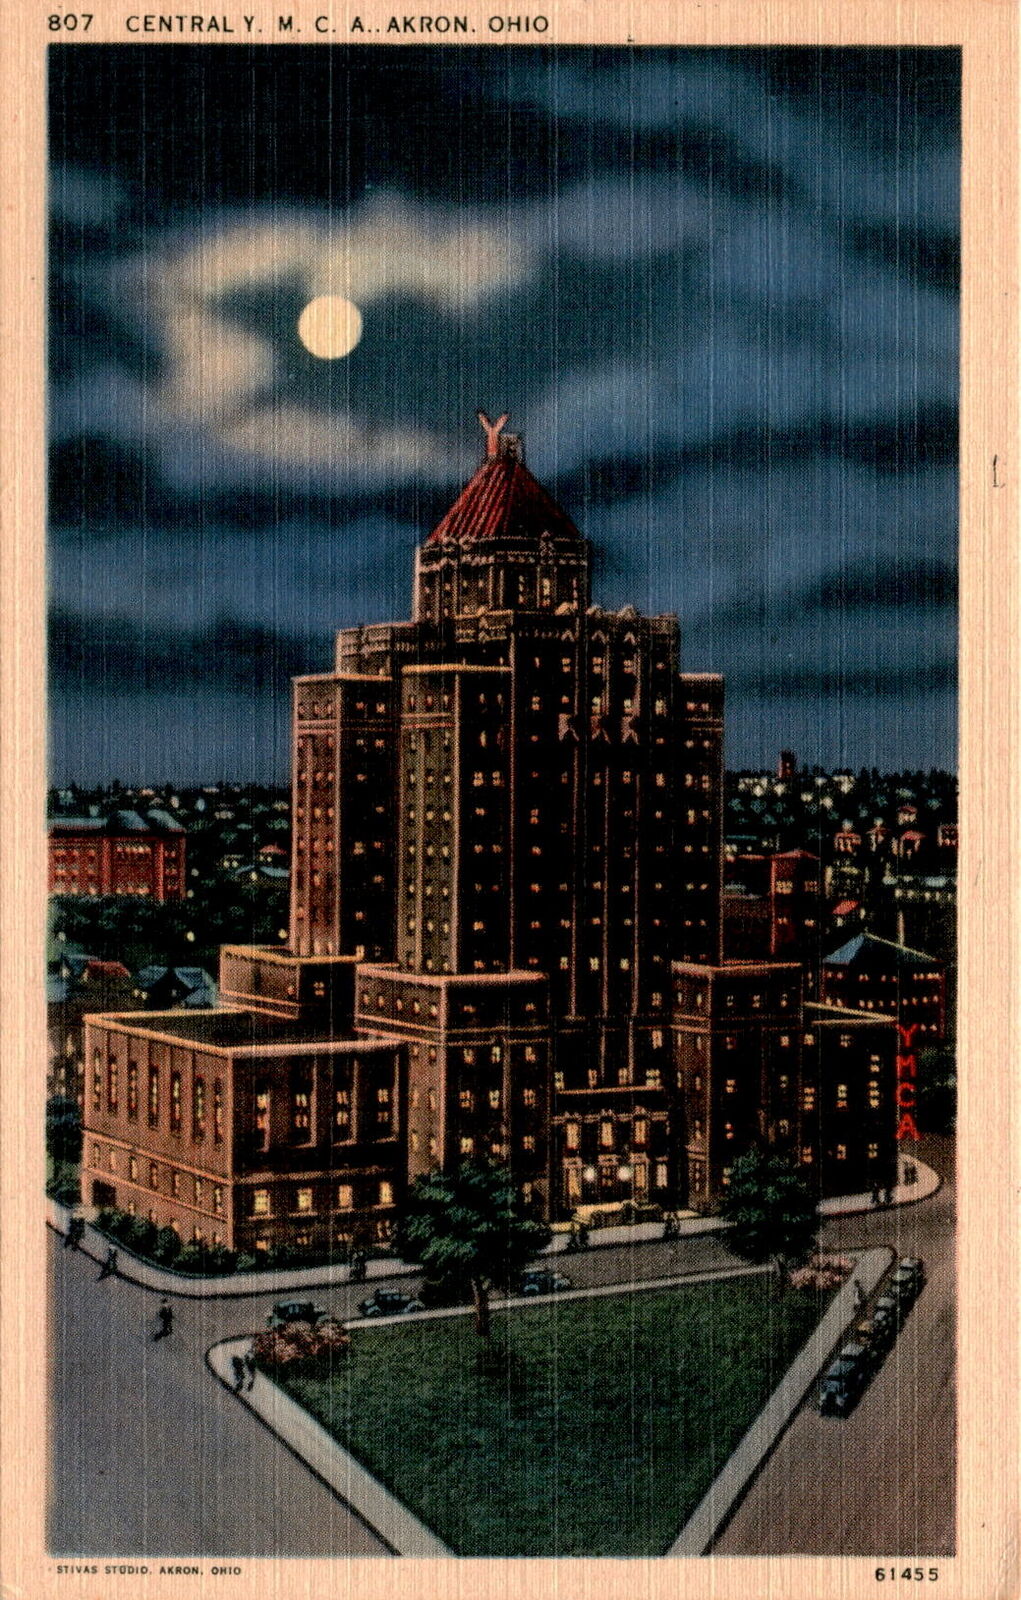 Central Y.M.C.A., Akron, Ohio, 17-story building, heart of the city Postcard